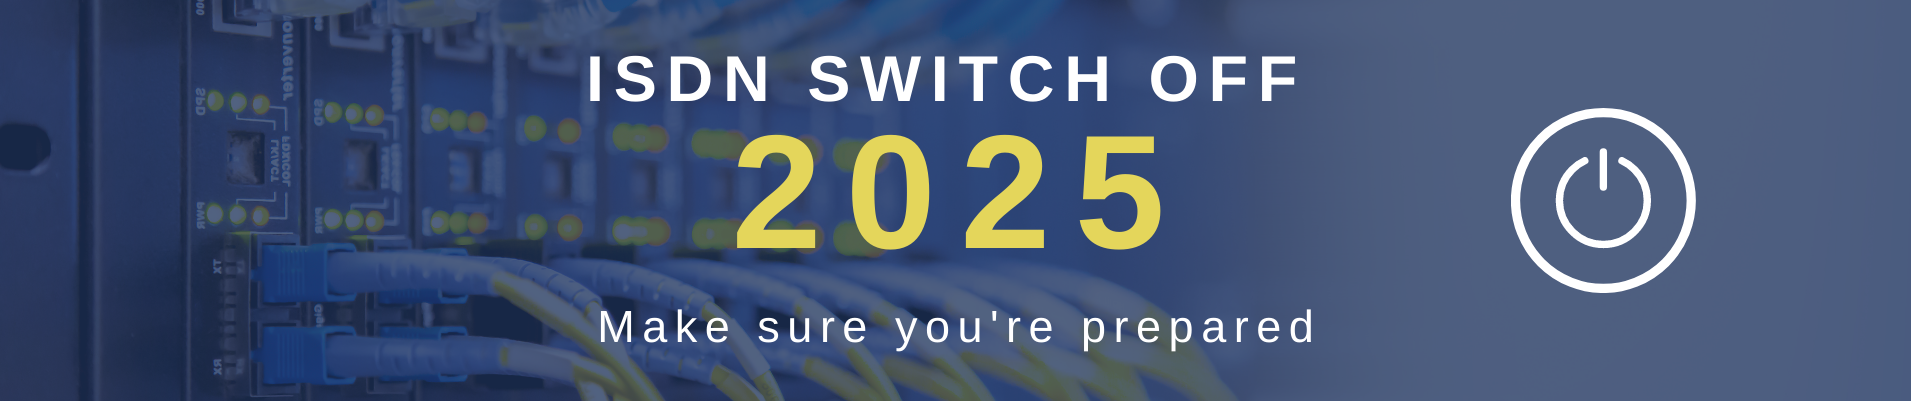 isdn switch off 2025 (1)